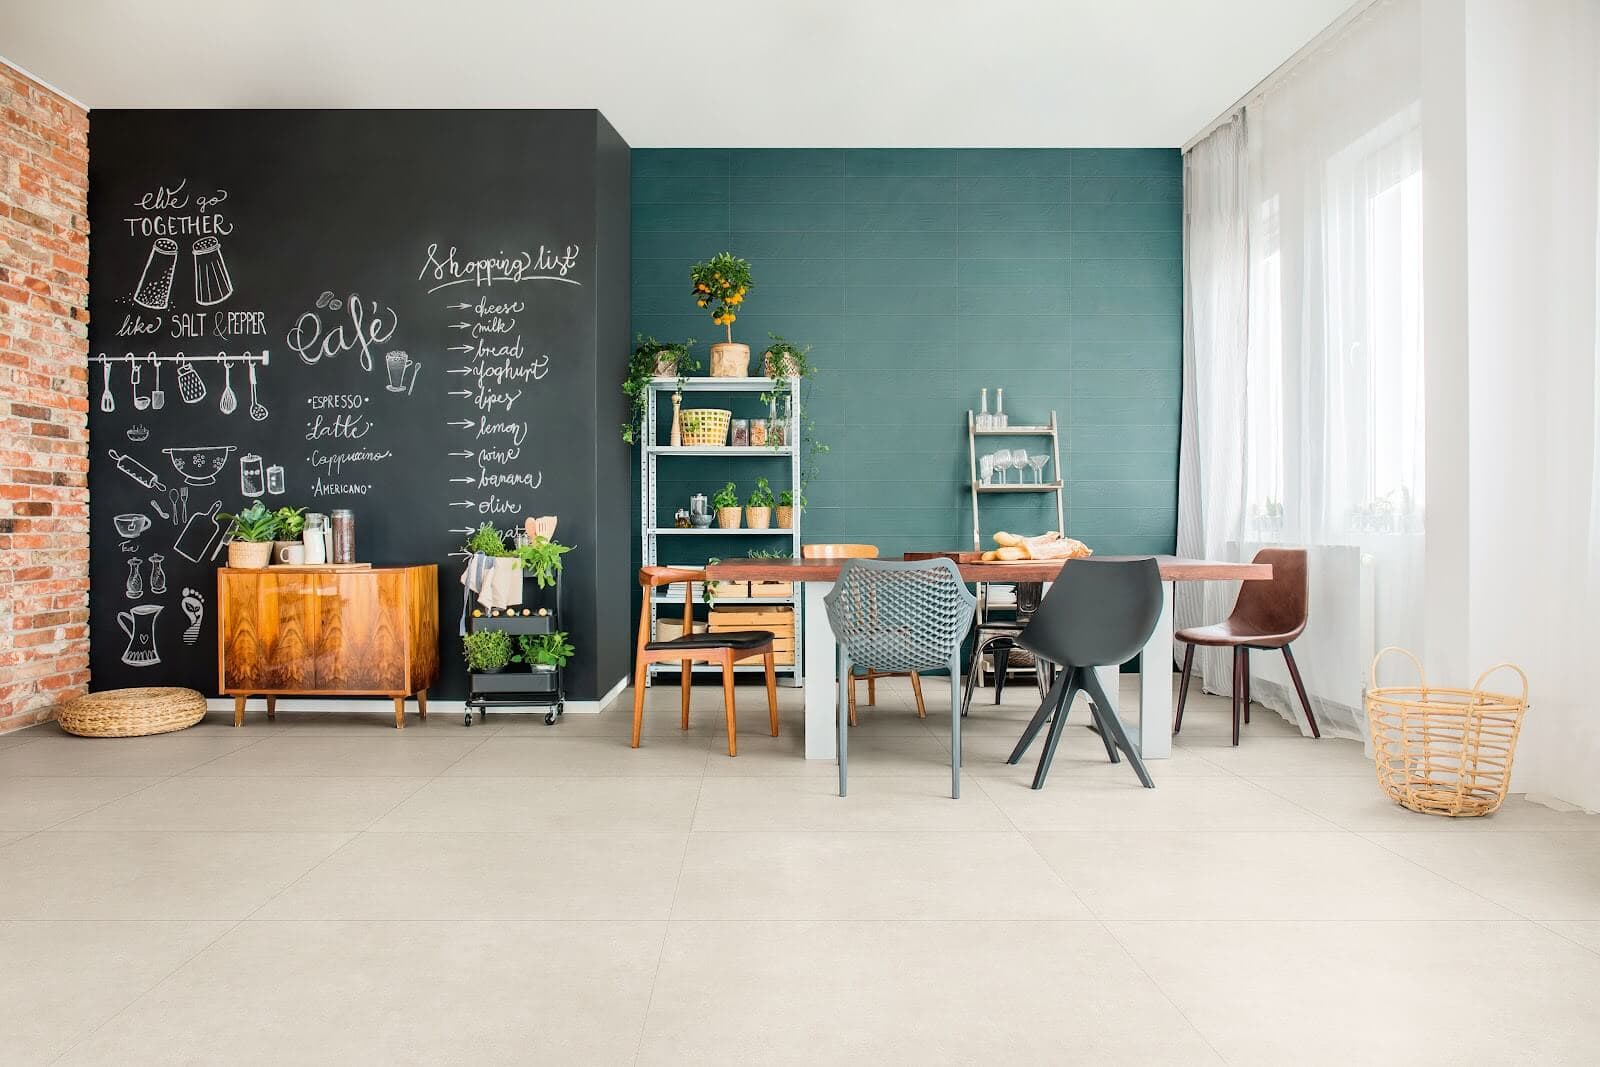 Café wall with teal aquamarine shade tile and combining earth tones